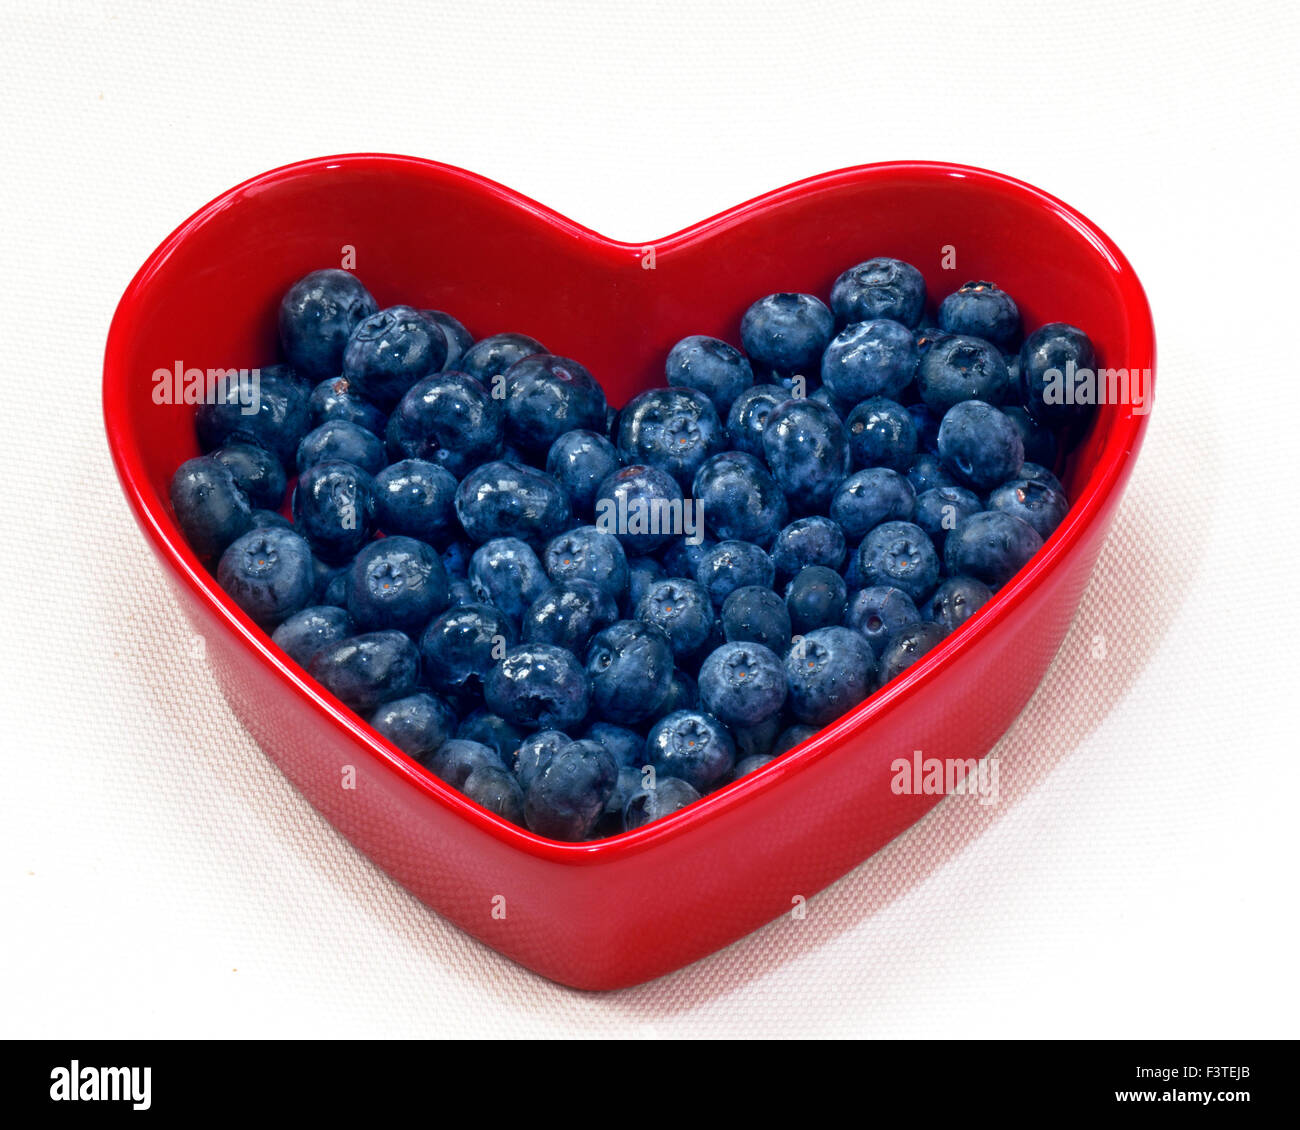 BLUEBERRIES HEART DISH Health food heart concept / Blueberries in a red heart shaped dish on white background Stock Photo